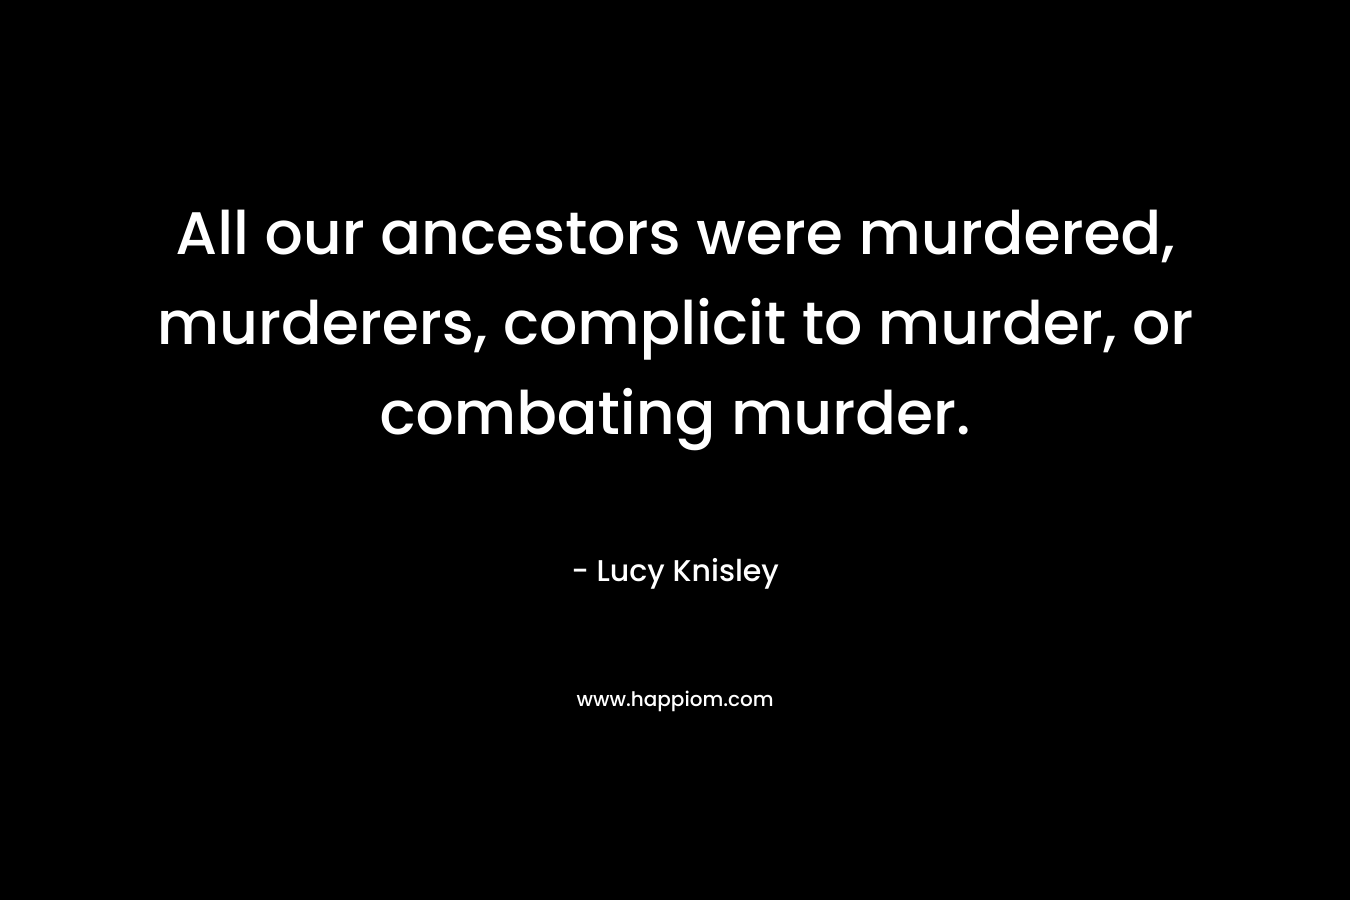 All our ancestors were murdered, murderers, complicit to murder, or combating murder.